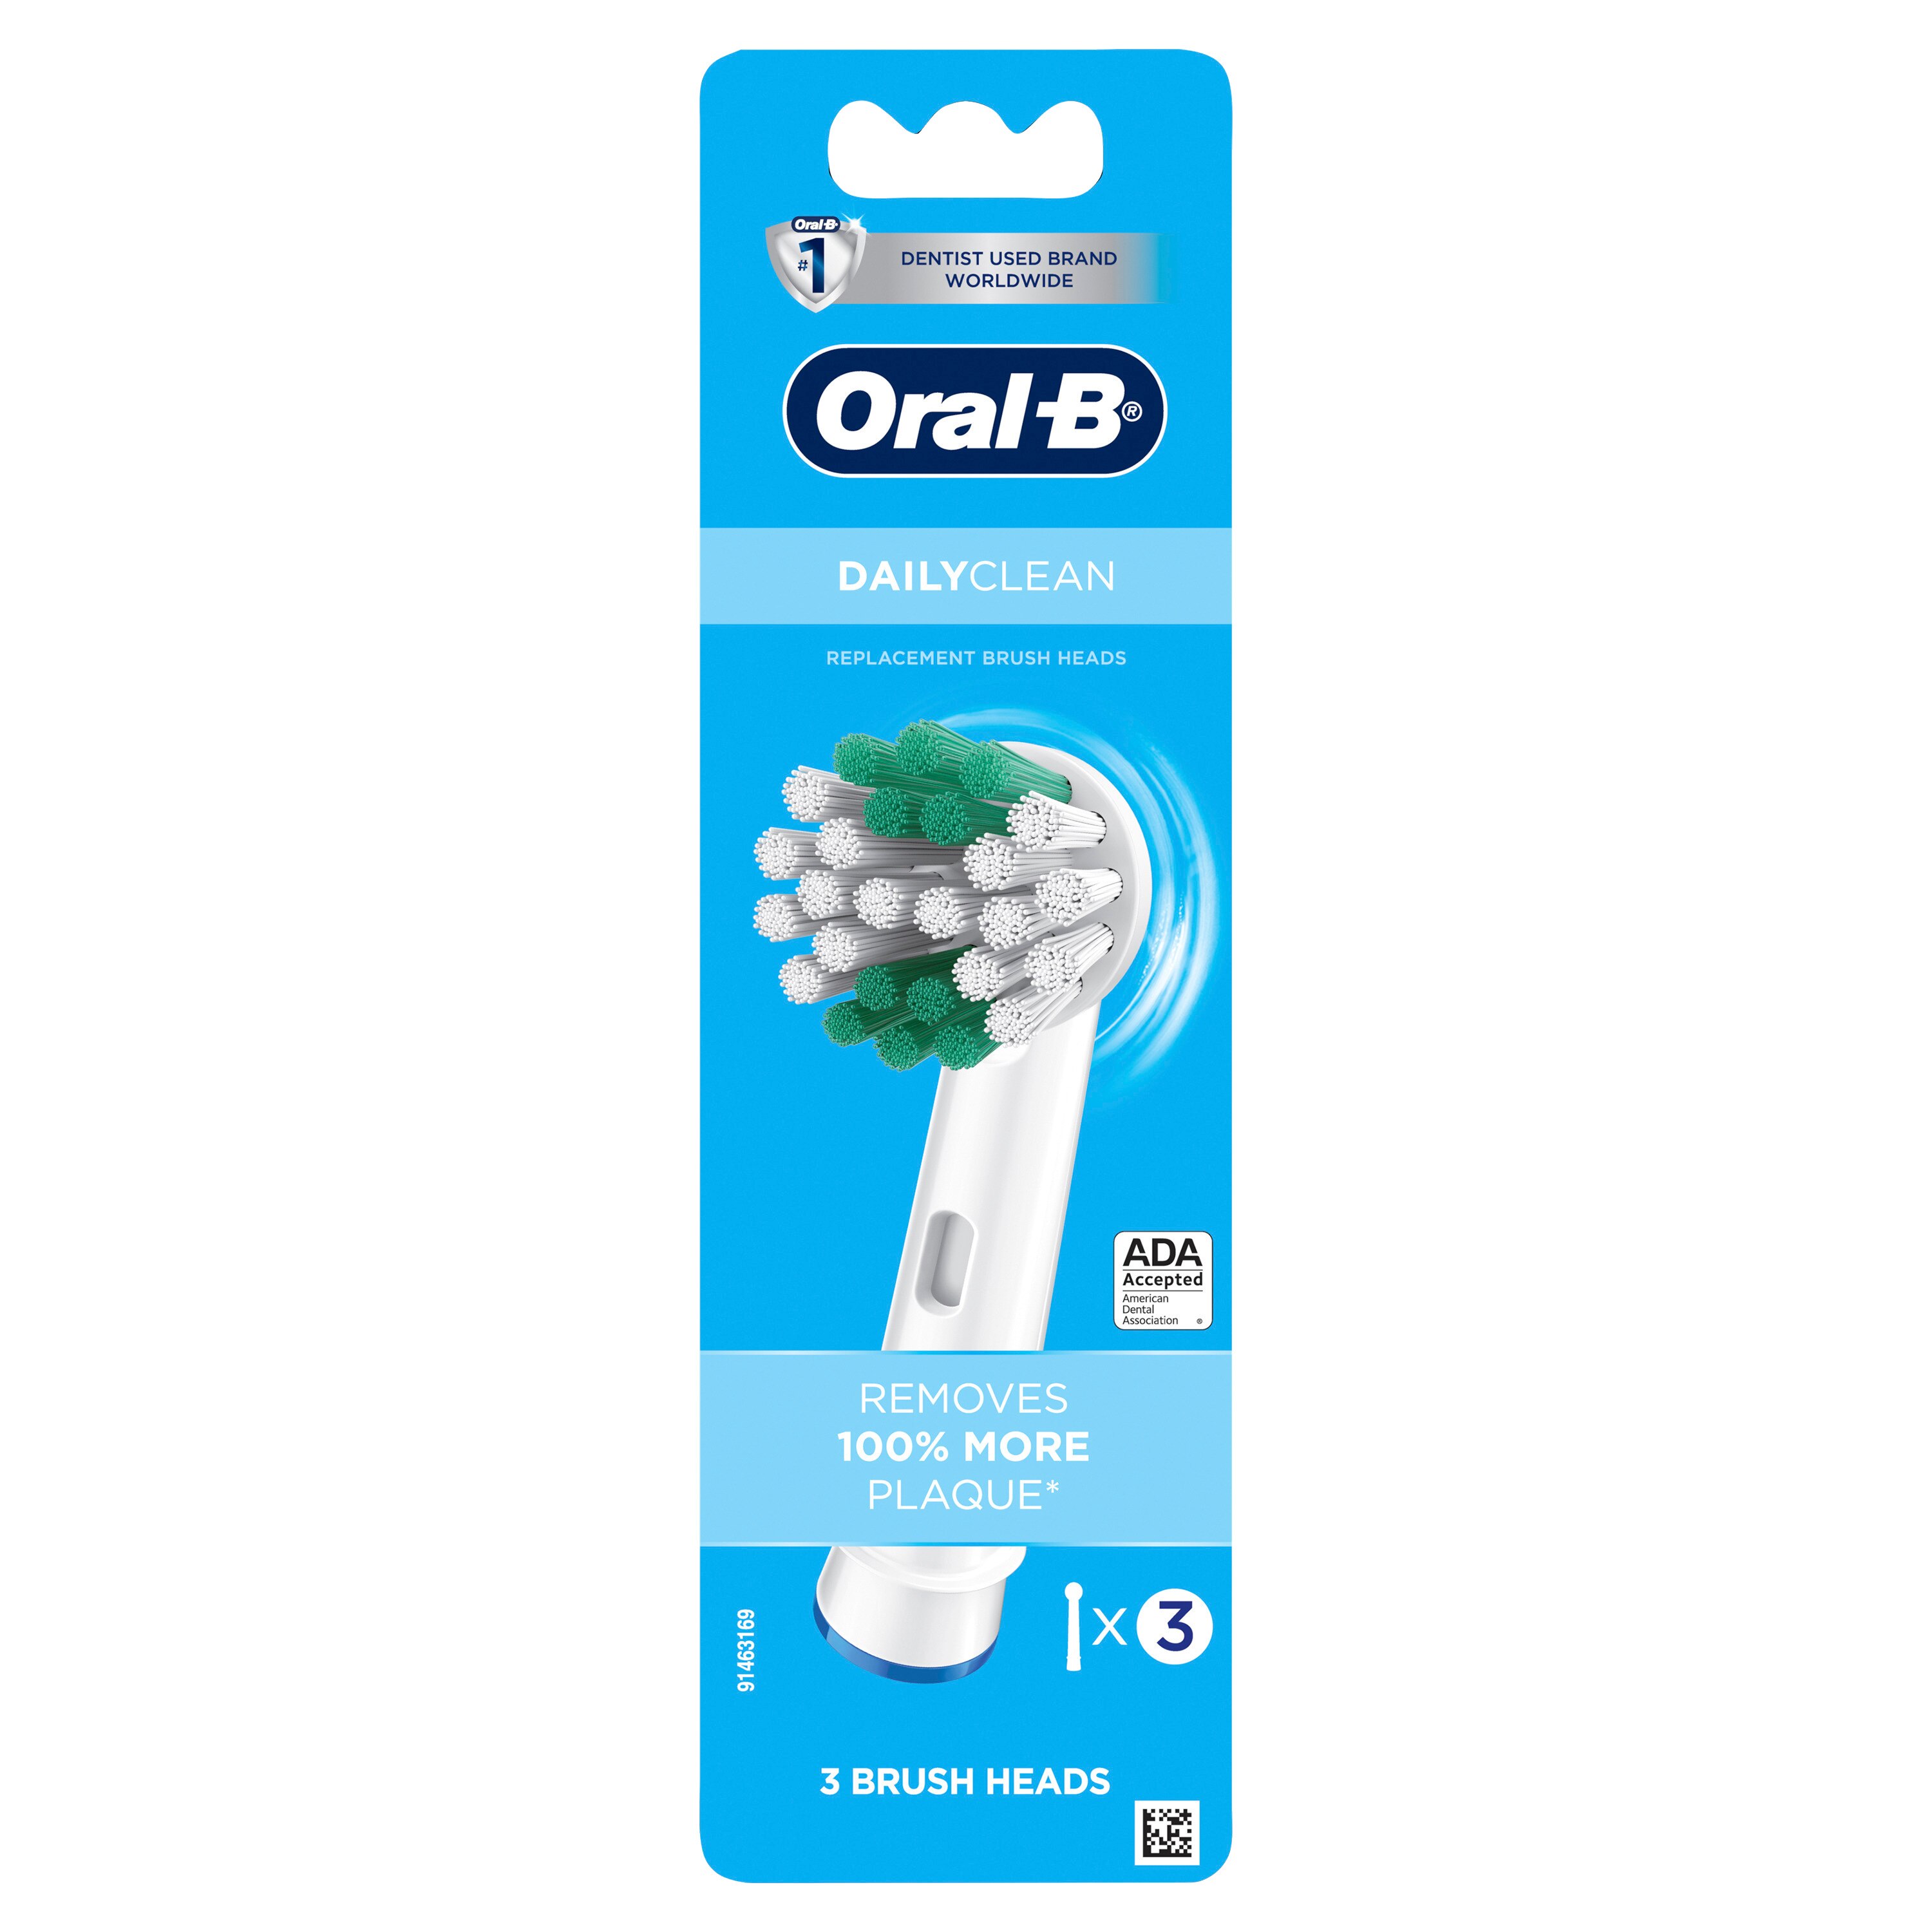 Oral-B Daily Clean Electric Toothbrush Replacement Brush Heads Refill, 3 CT